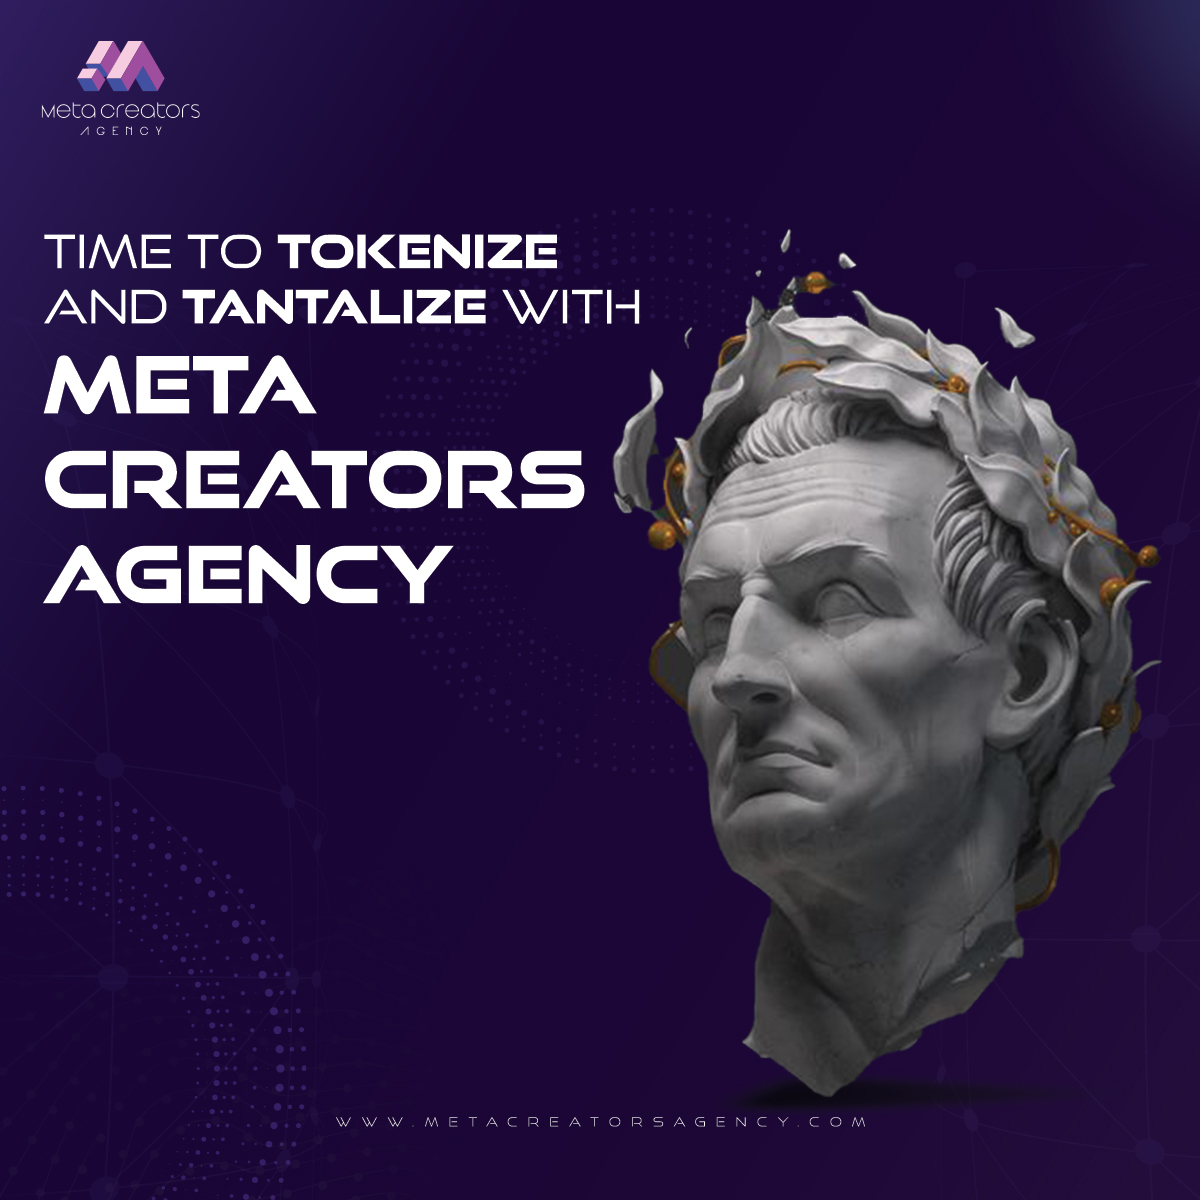 Make your #NFT timeless with #MetaCreatorsAgency. 

At Meta Creators Agency, we specialize in the art of tokenization, turning your artistic creations into one-of-a-kind NFTs. 

#metacreatorsagency #nfts #blockchain #web3 #defi #nftcommunity #web3revolution #blockchaintechnology